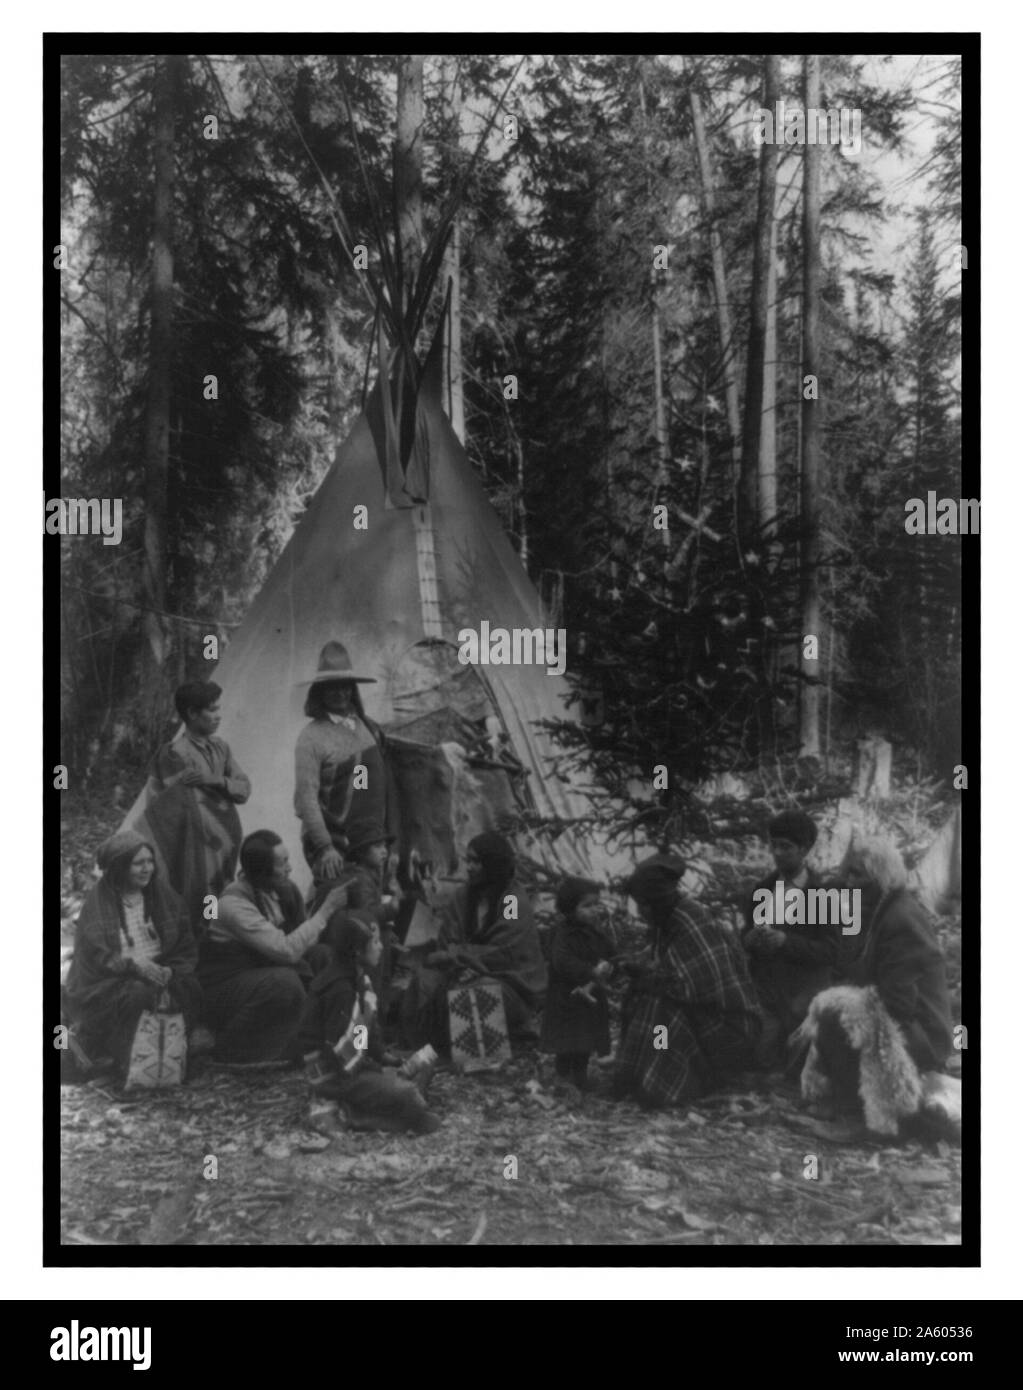 Flathead Indians holding pre-Christmas family gatherings on the west side of Glacier National Park, in the dense forest of evergreen trees that skirt the Rocky Mountains. Stock Photo